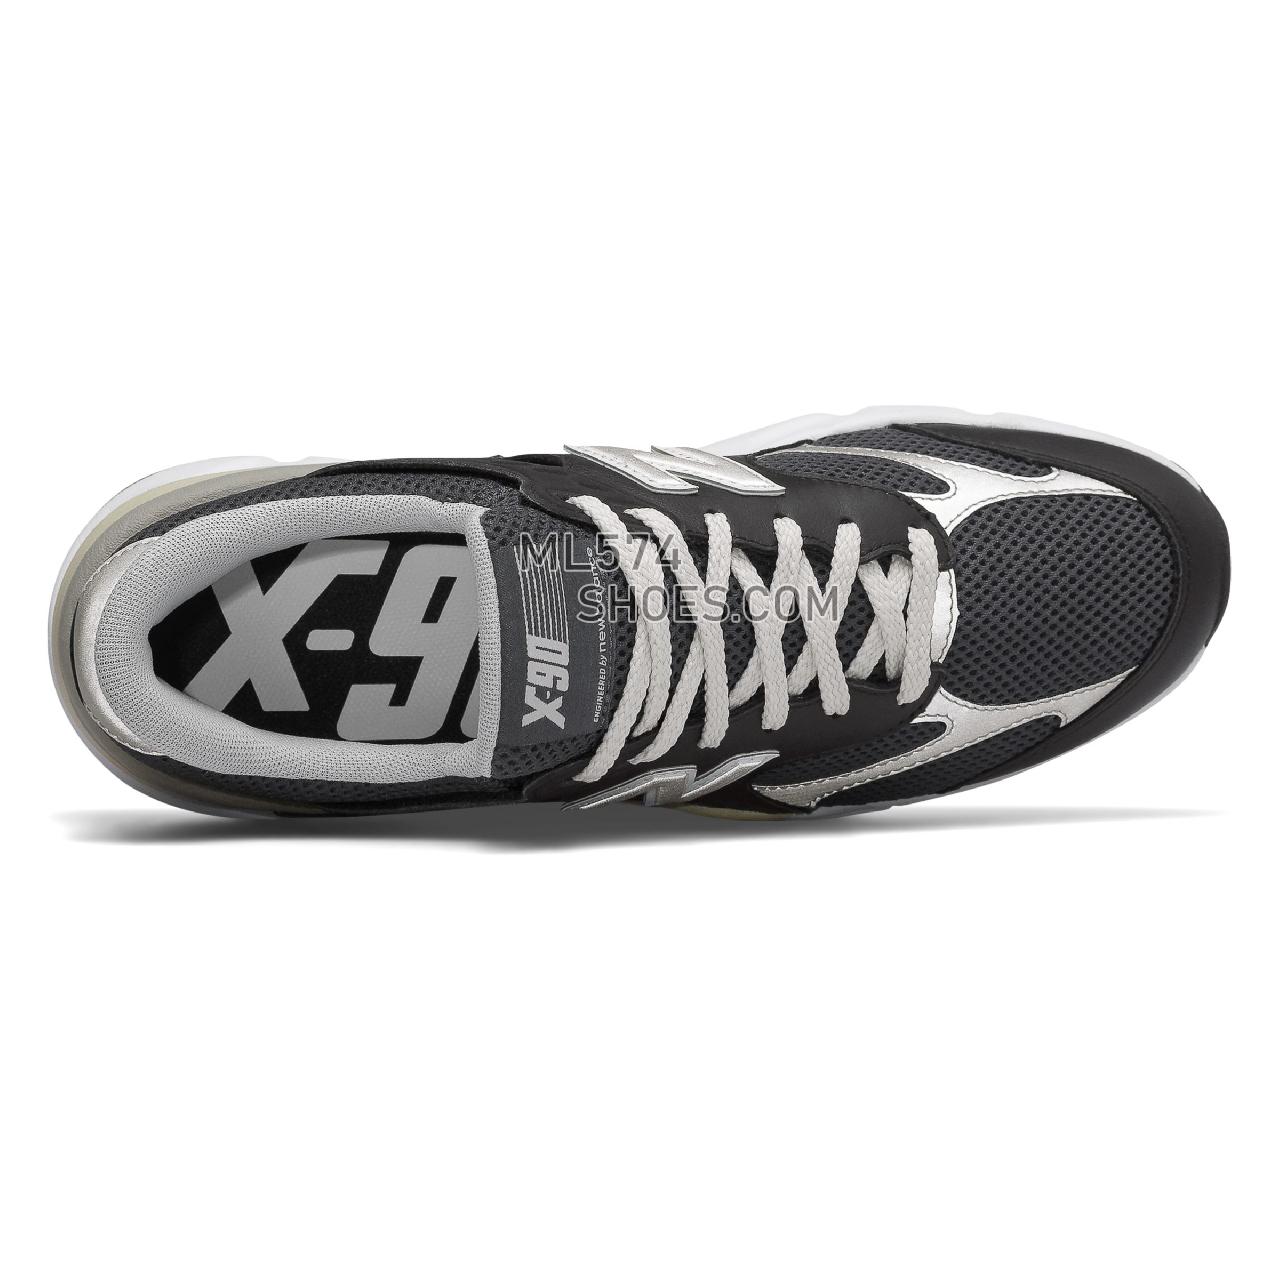 New Balance X-90 Reconstructed - Men's Sport Style Sneakers - Black with Orca - MSX90RPA